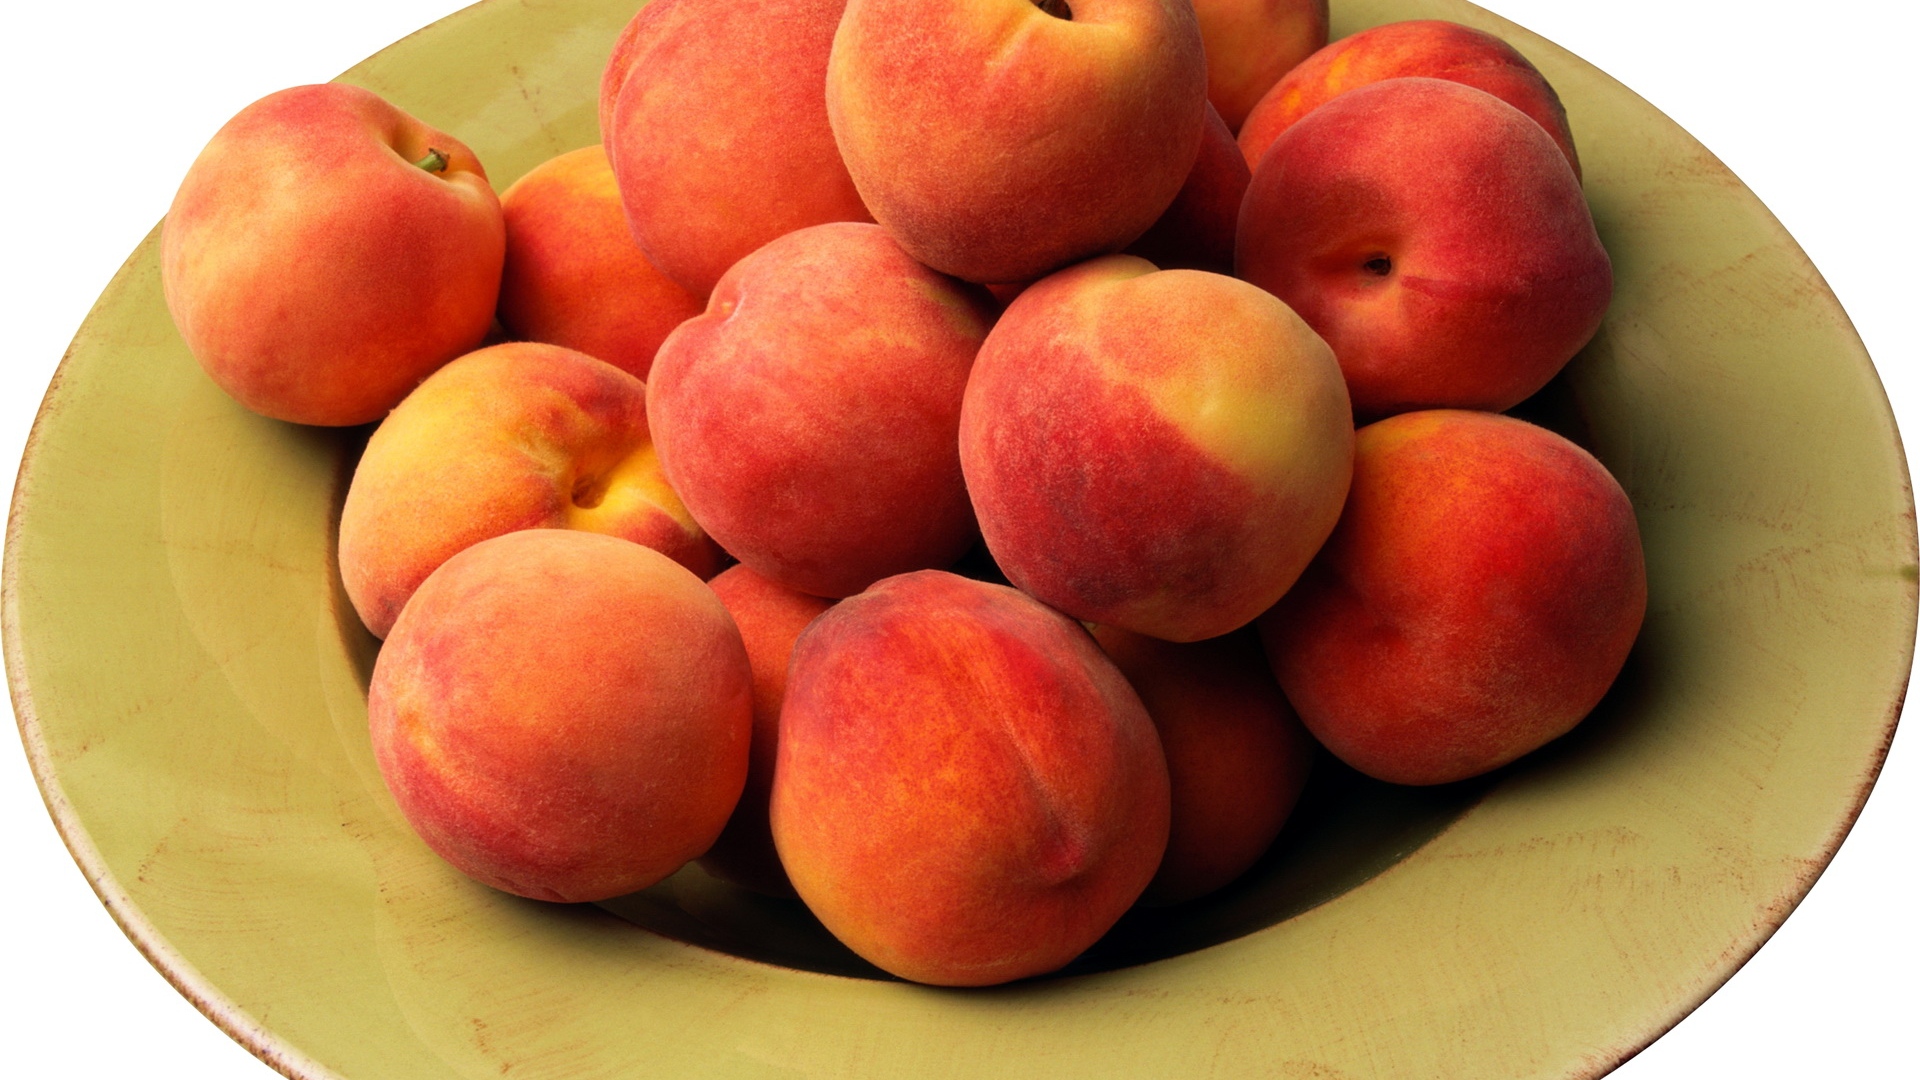 Download Wallpaper 1920x1080 peaches, apricots, fruit, plate Full HD ...